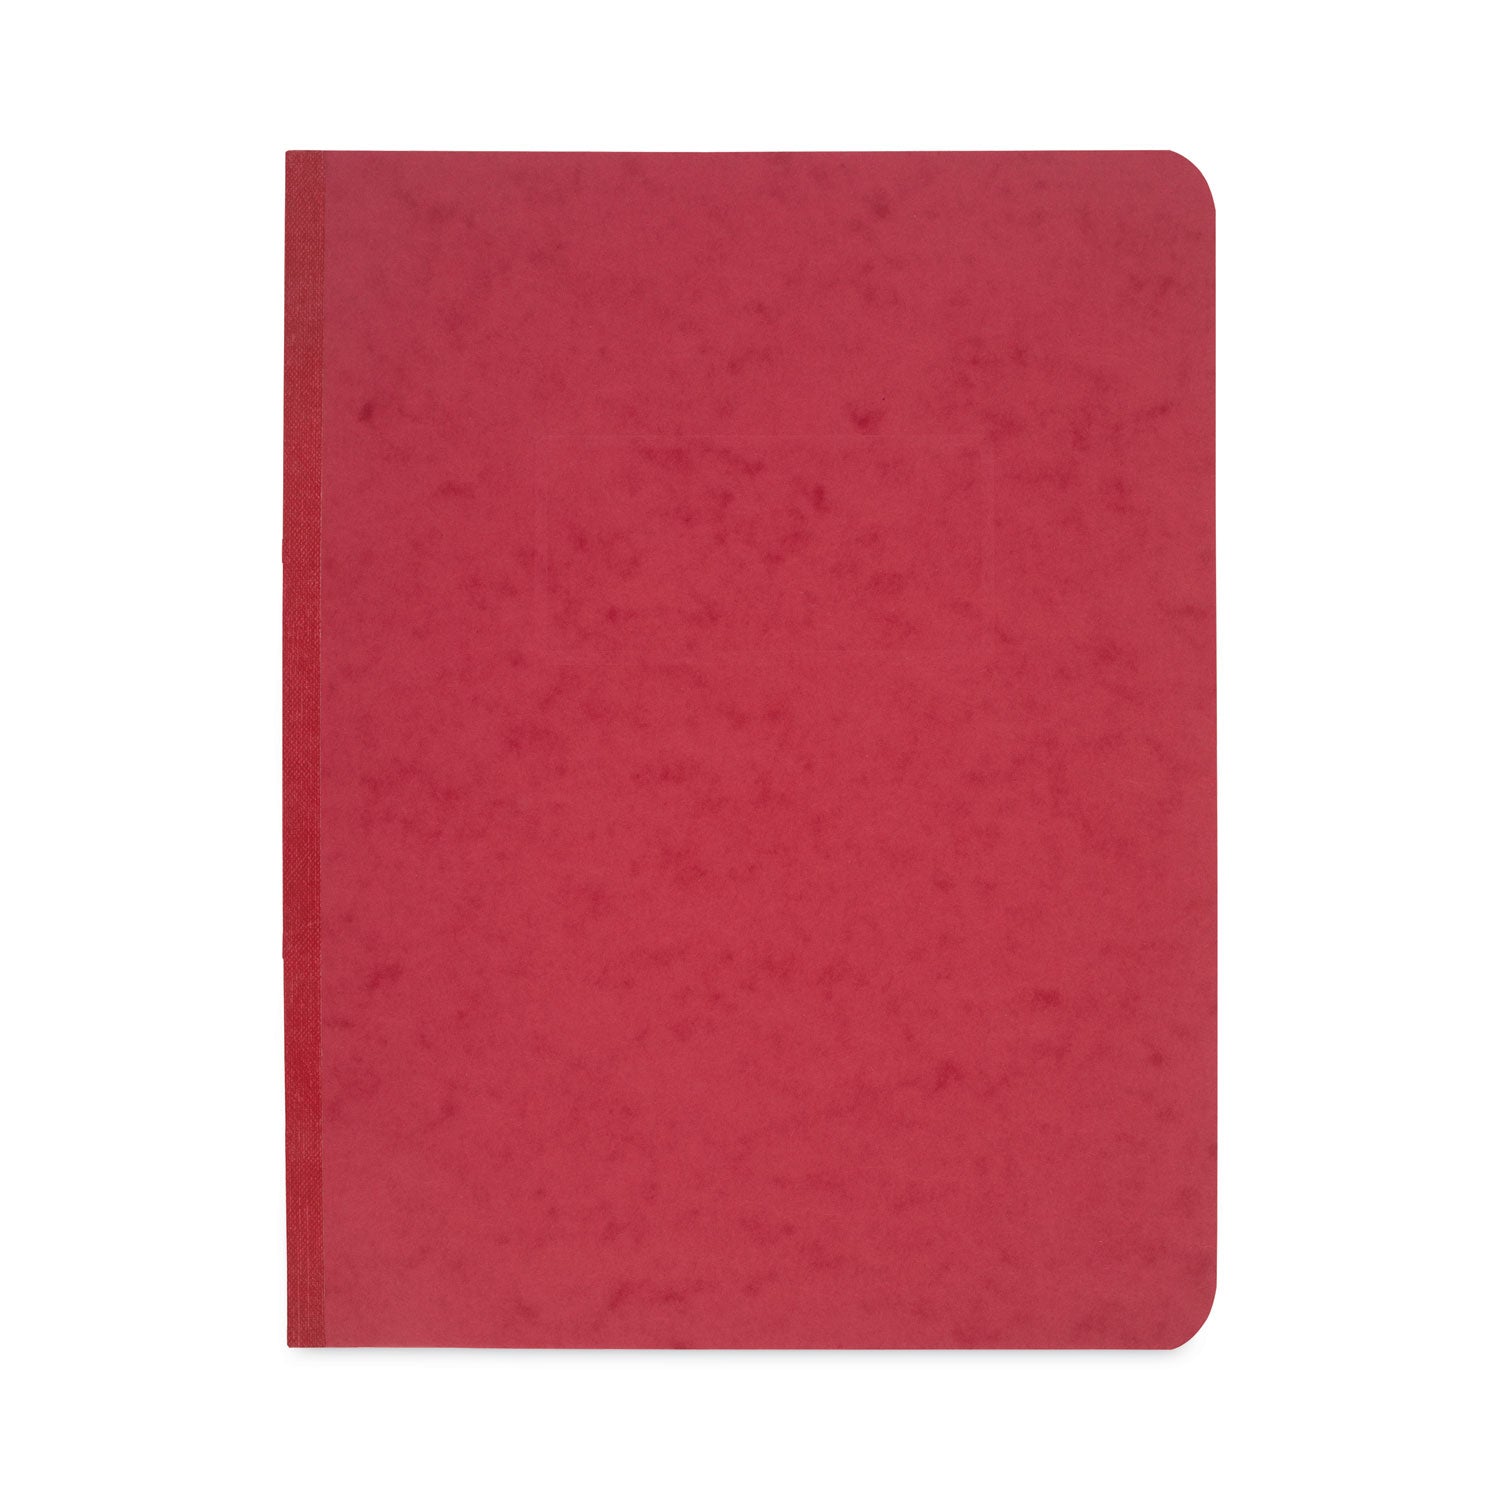 Pressboard Report Cover with Tyvek Reinforced Hinge, Two-Piece Prong Fastener, 3" Capacity, 8.5 x 11, Red/Red - 